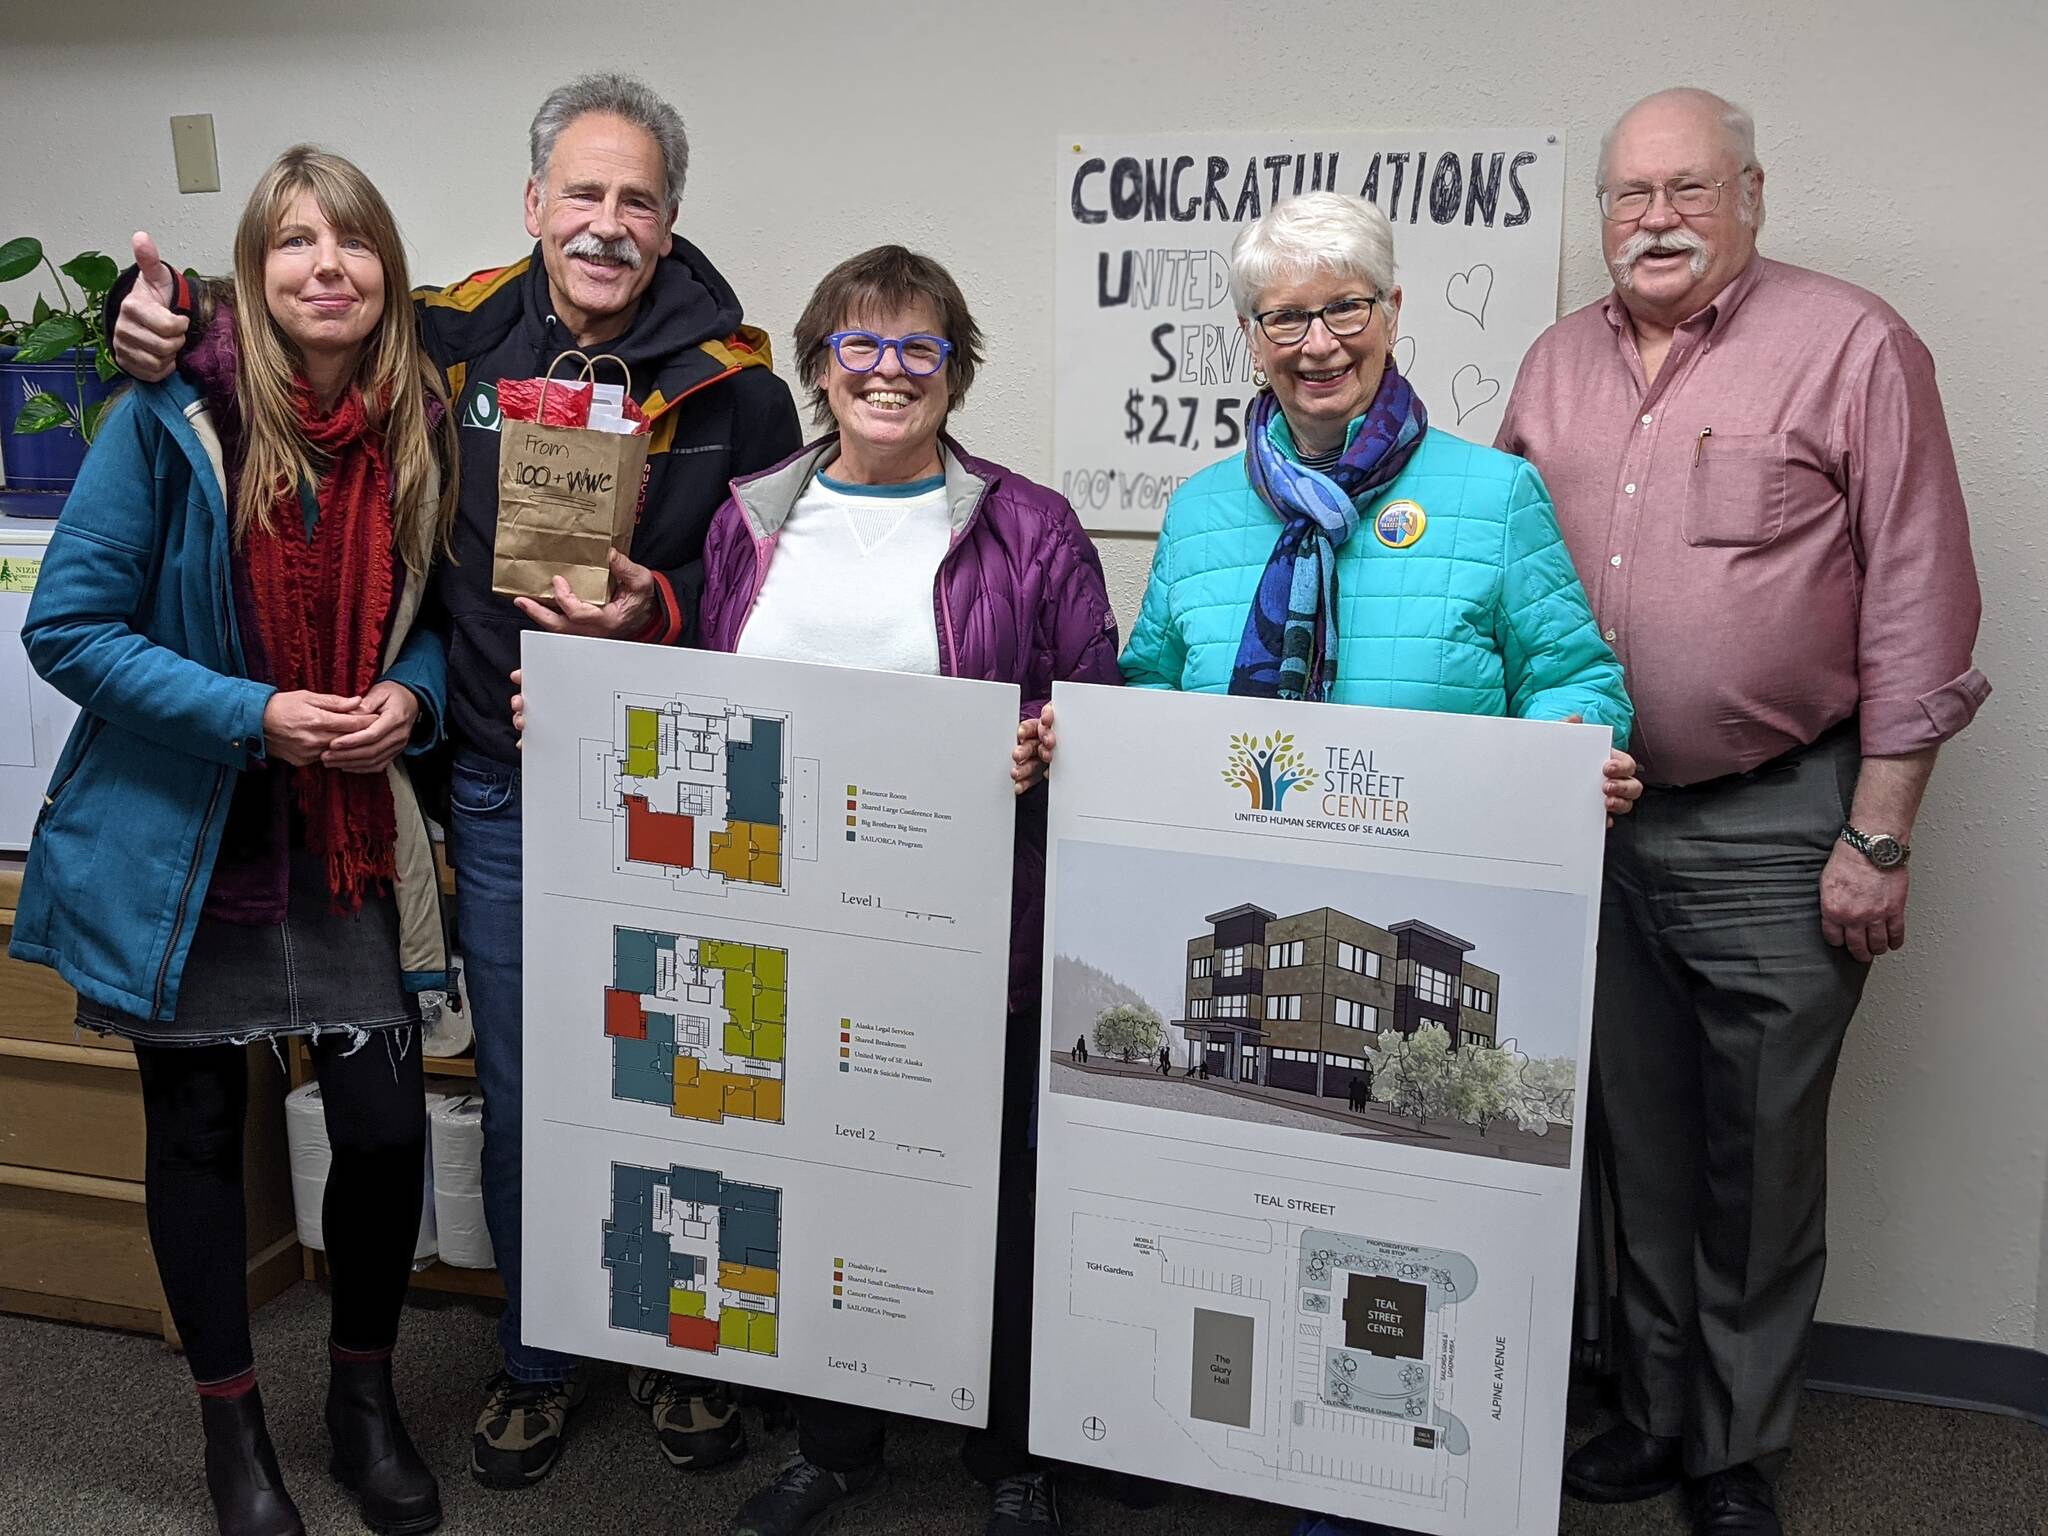 Representatives from Juneau’s 100+ Women Who Care present donations to support Teal Street Center. Pictured are Julie Nielsen, 100WWC; Joe Parrish, UHS President; Marla Berg,100WWC; Sioux Douglas, Teal Street Center Campaign Chair; Wayne Stevens, UHS Board member & United Way of SE Alaska President.